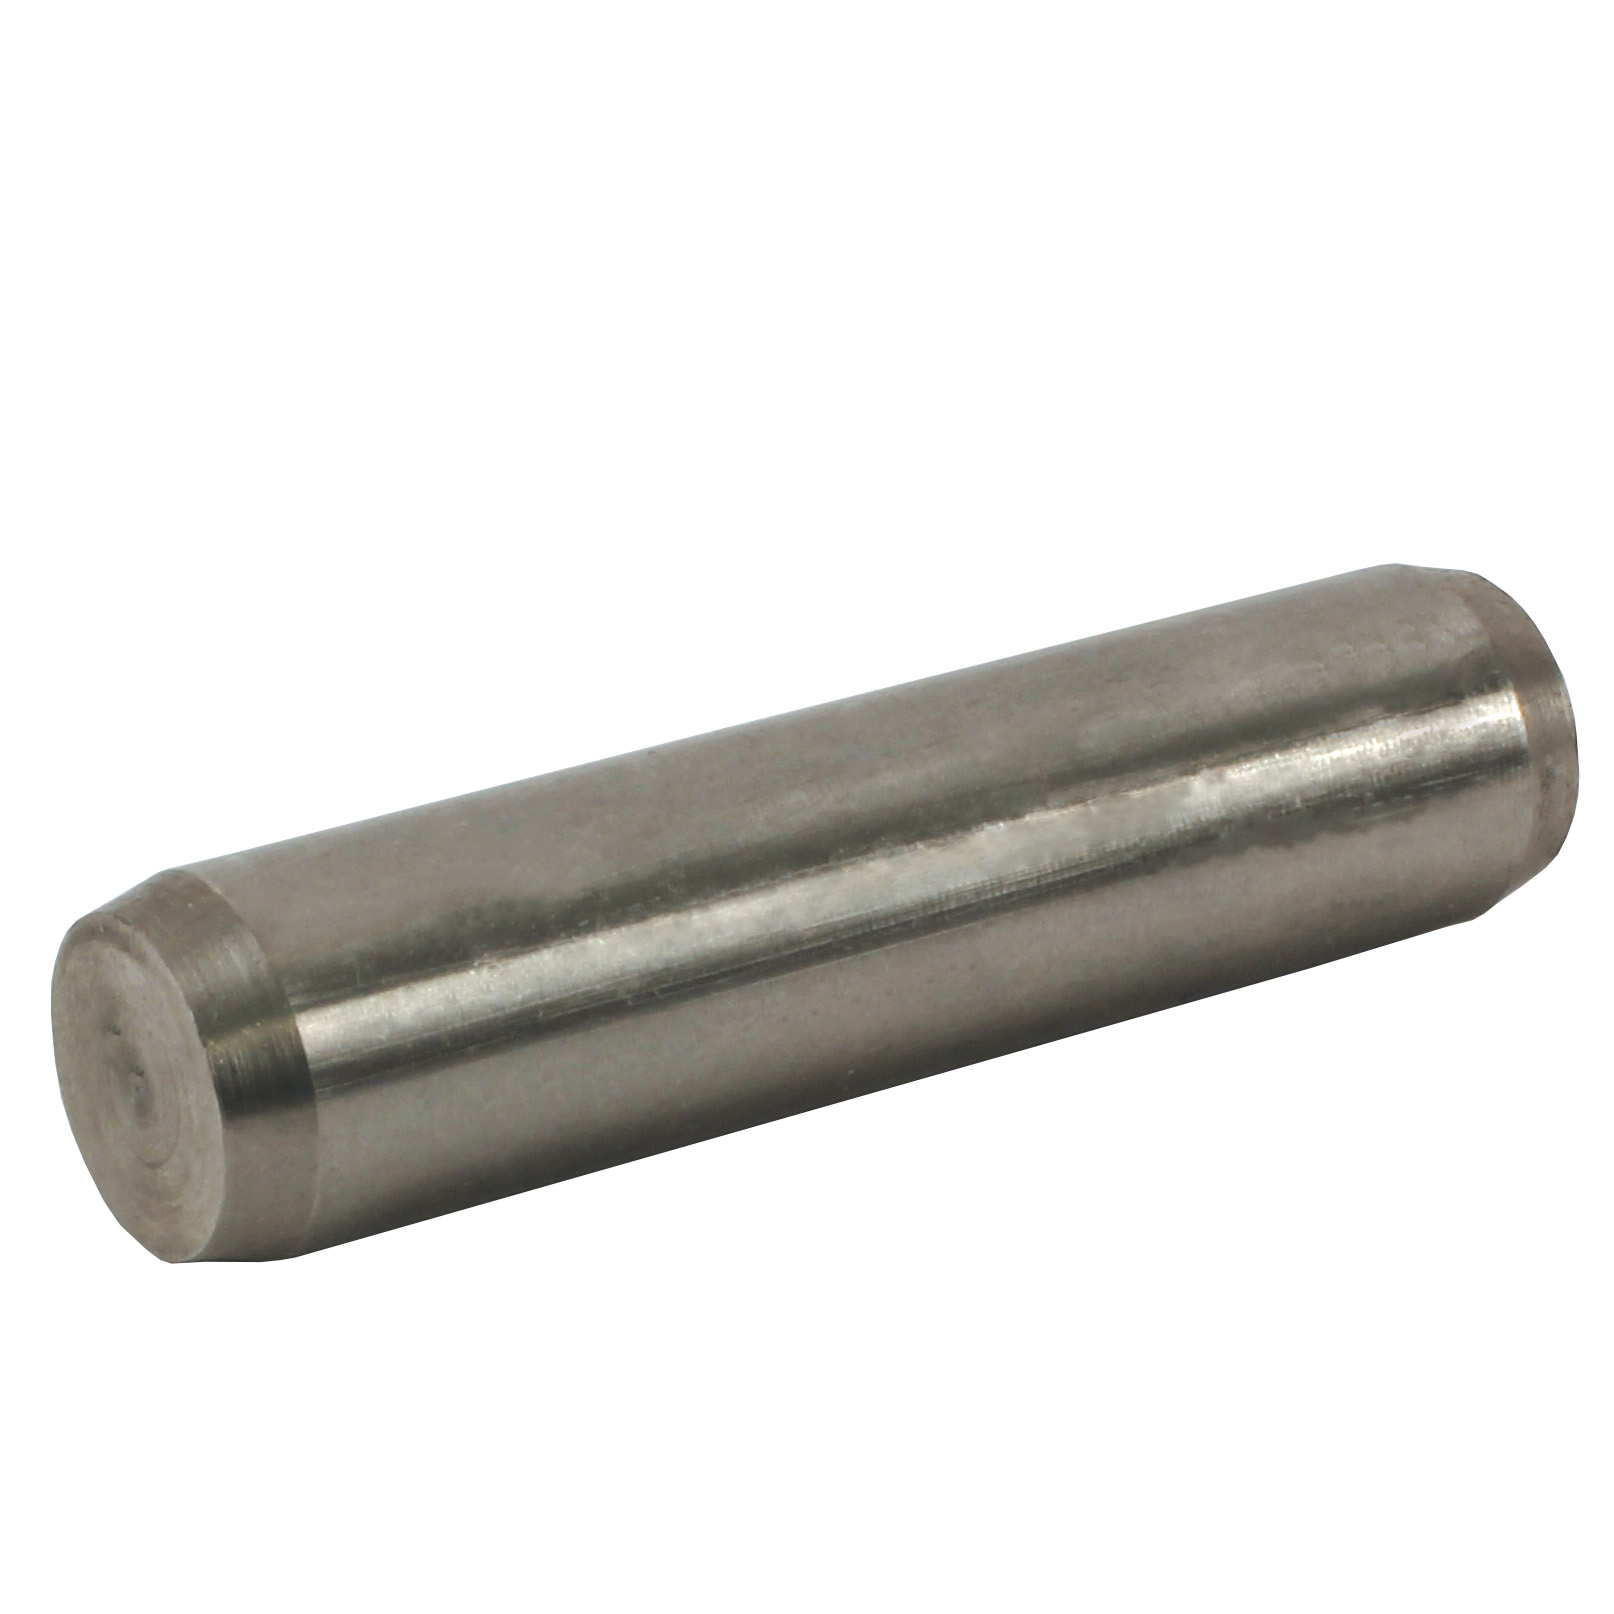 Cylindrical Pins Din 7 Ø 2,5 mm Iso 2338 2,5 x 4 to 2,5 x 25 mm Stainless Steel 